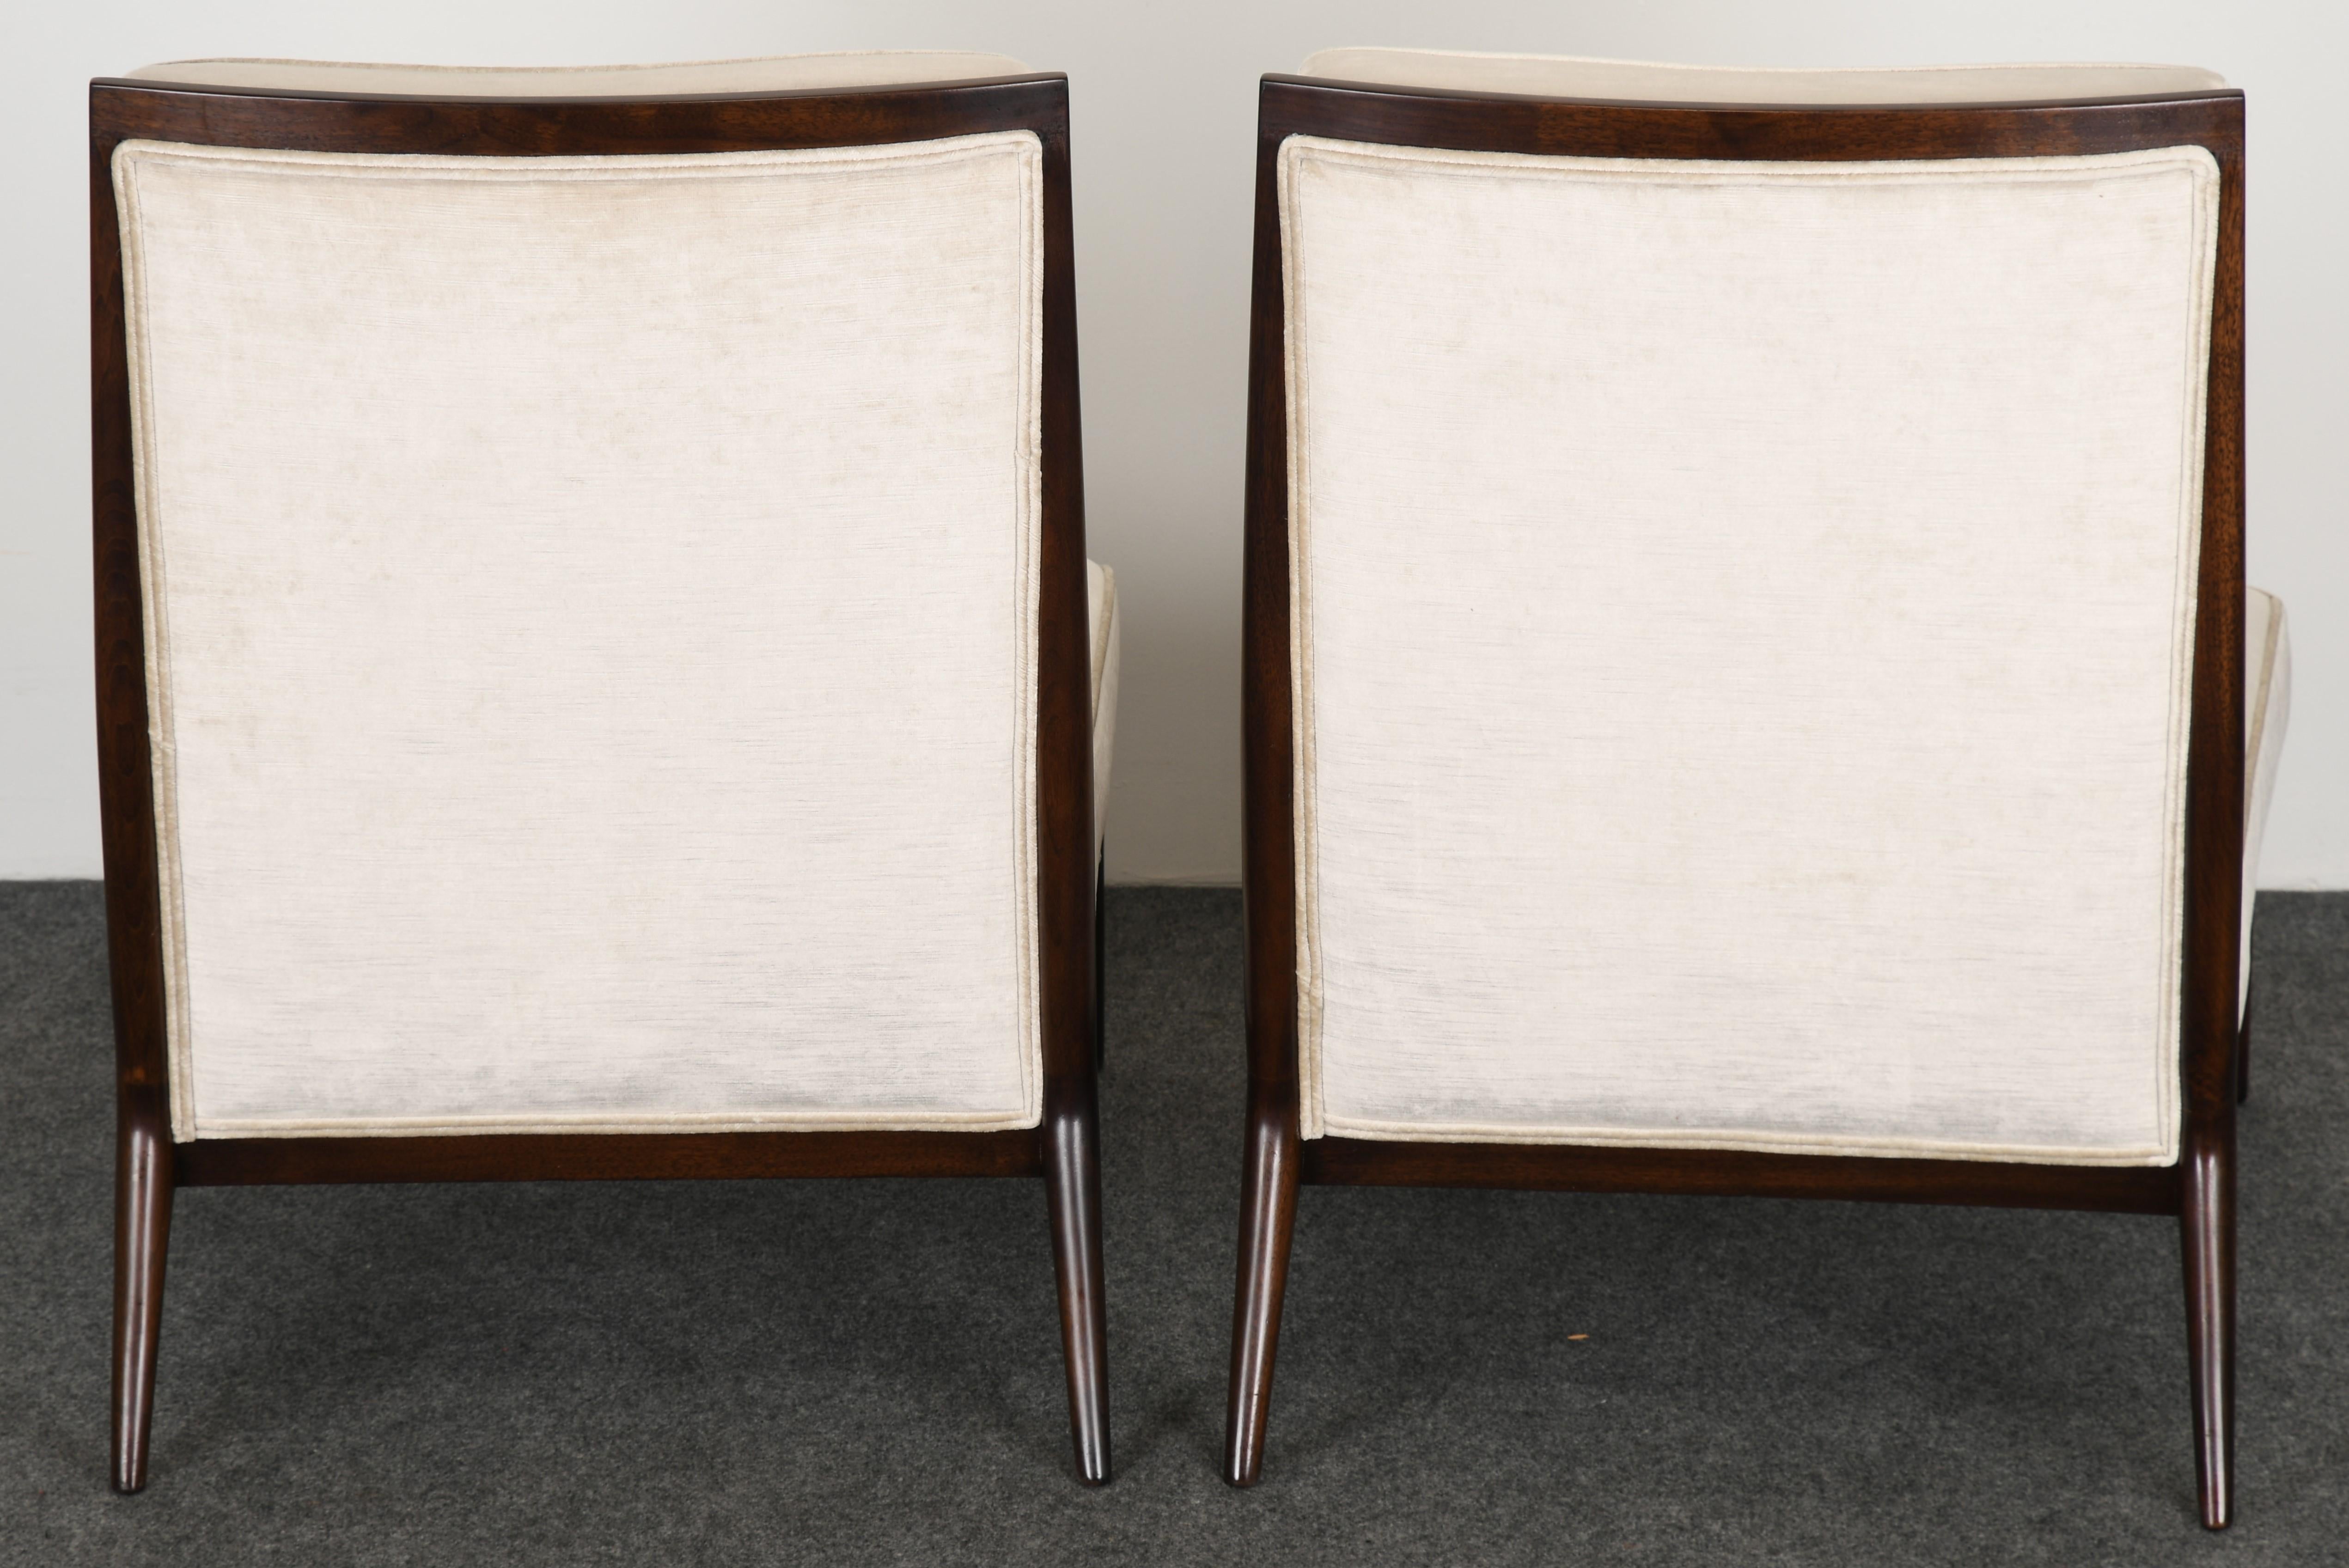 American Pair of Paul McCobb Slipper Chairs for Directional, 1950s